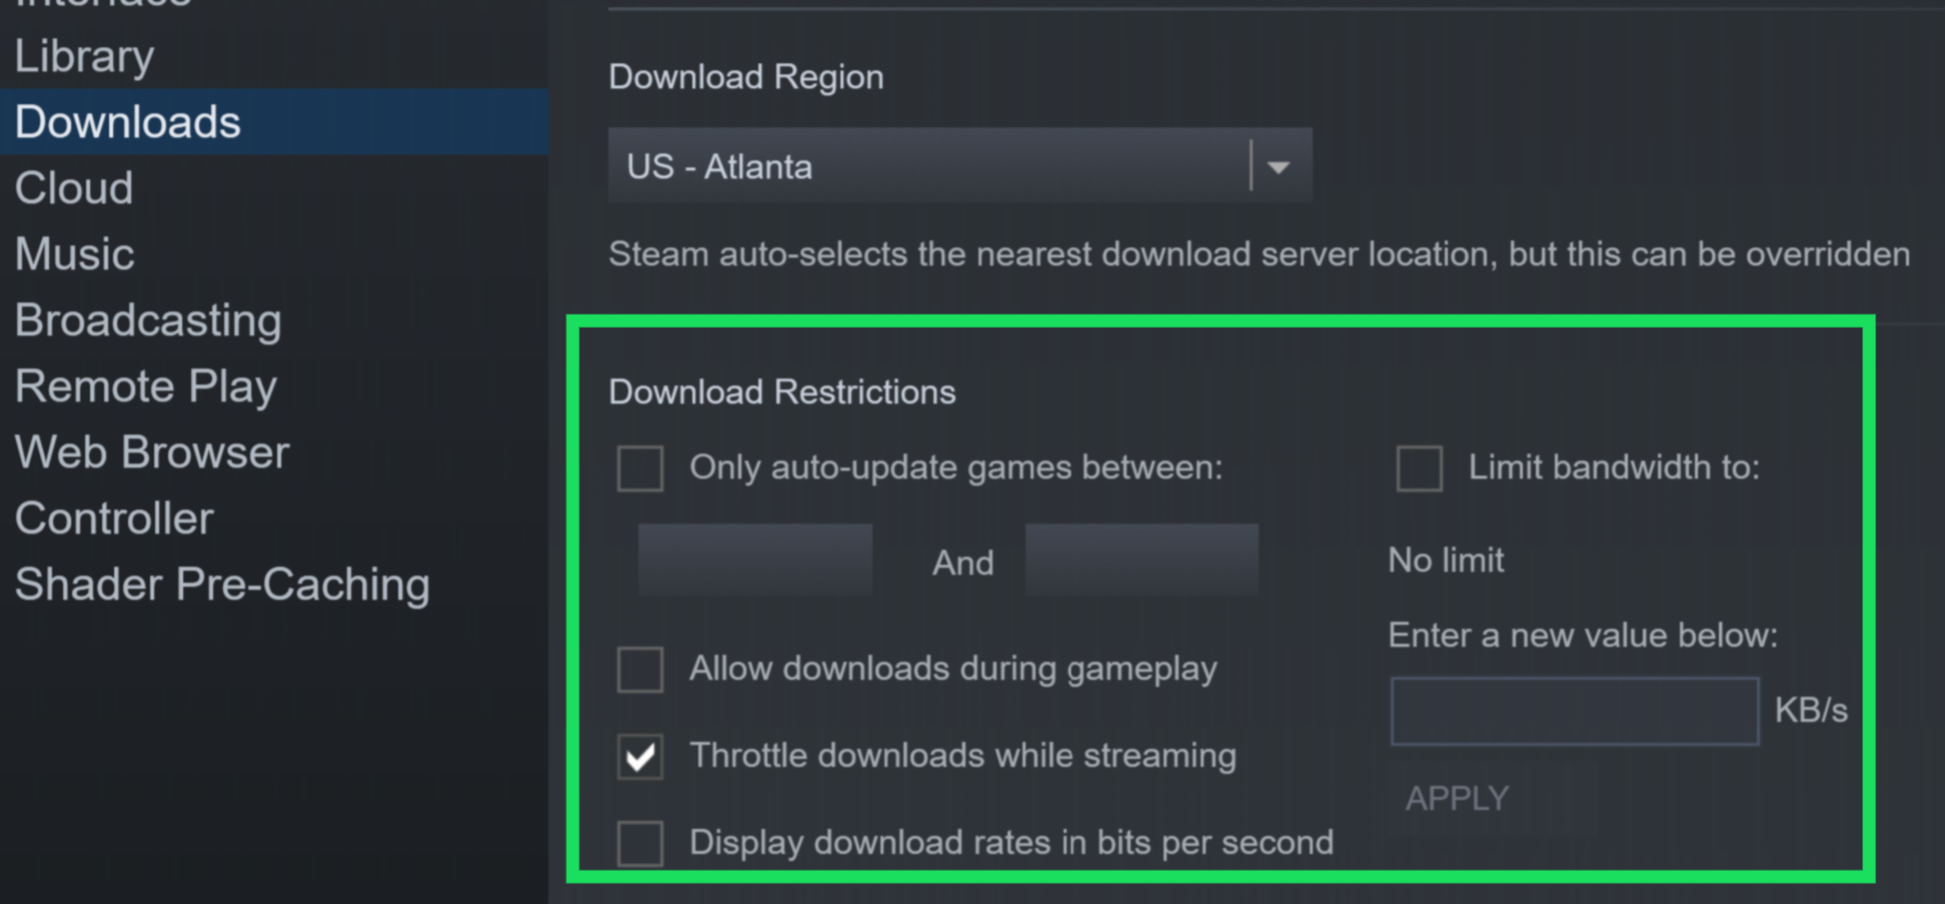 How To Increase Epic Games Download Speed (Fix Slow Downloads) - Full Guide  